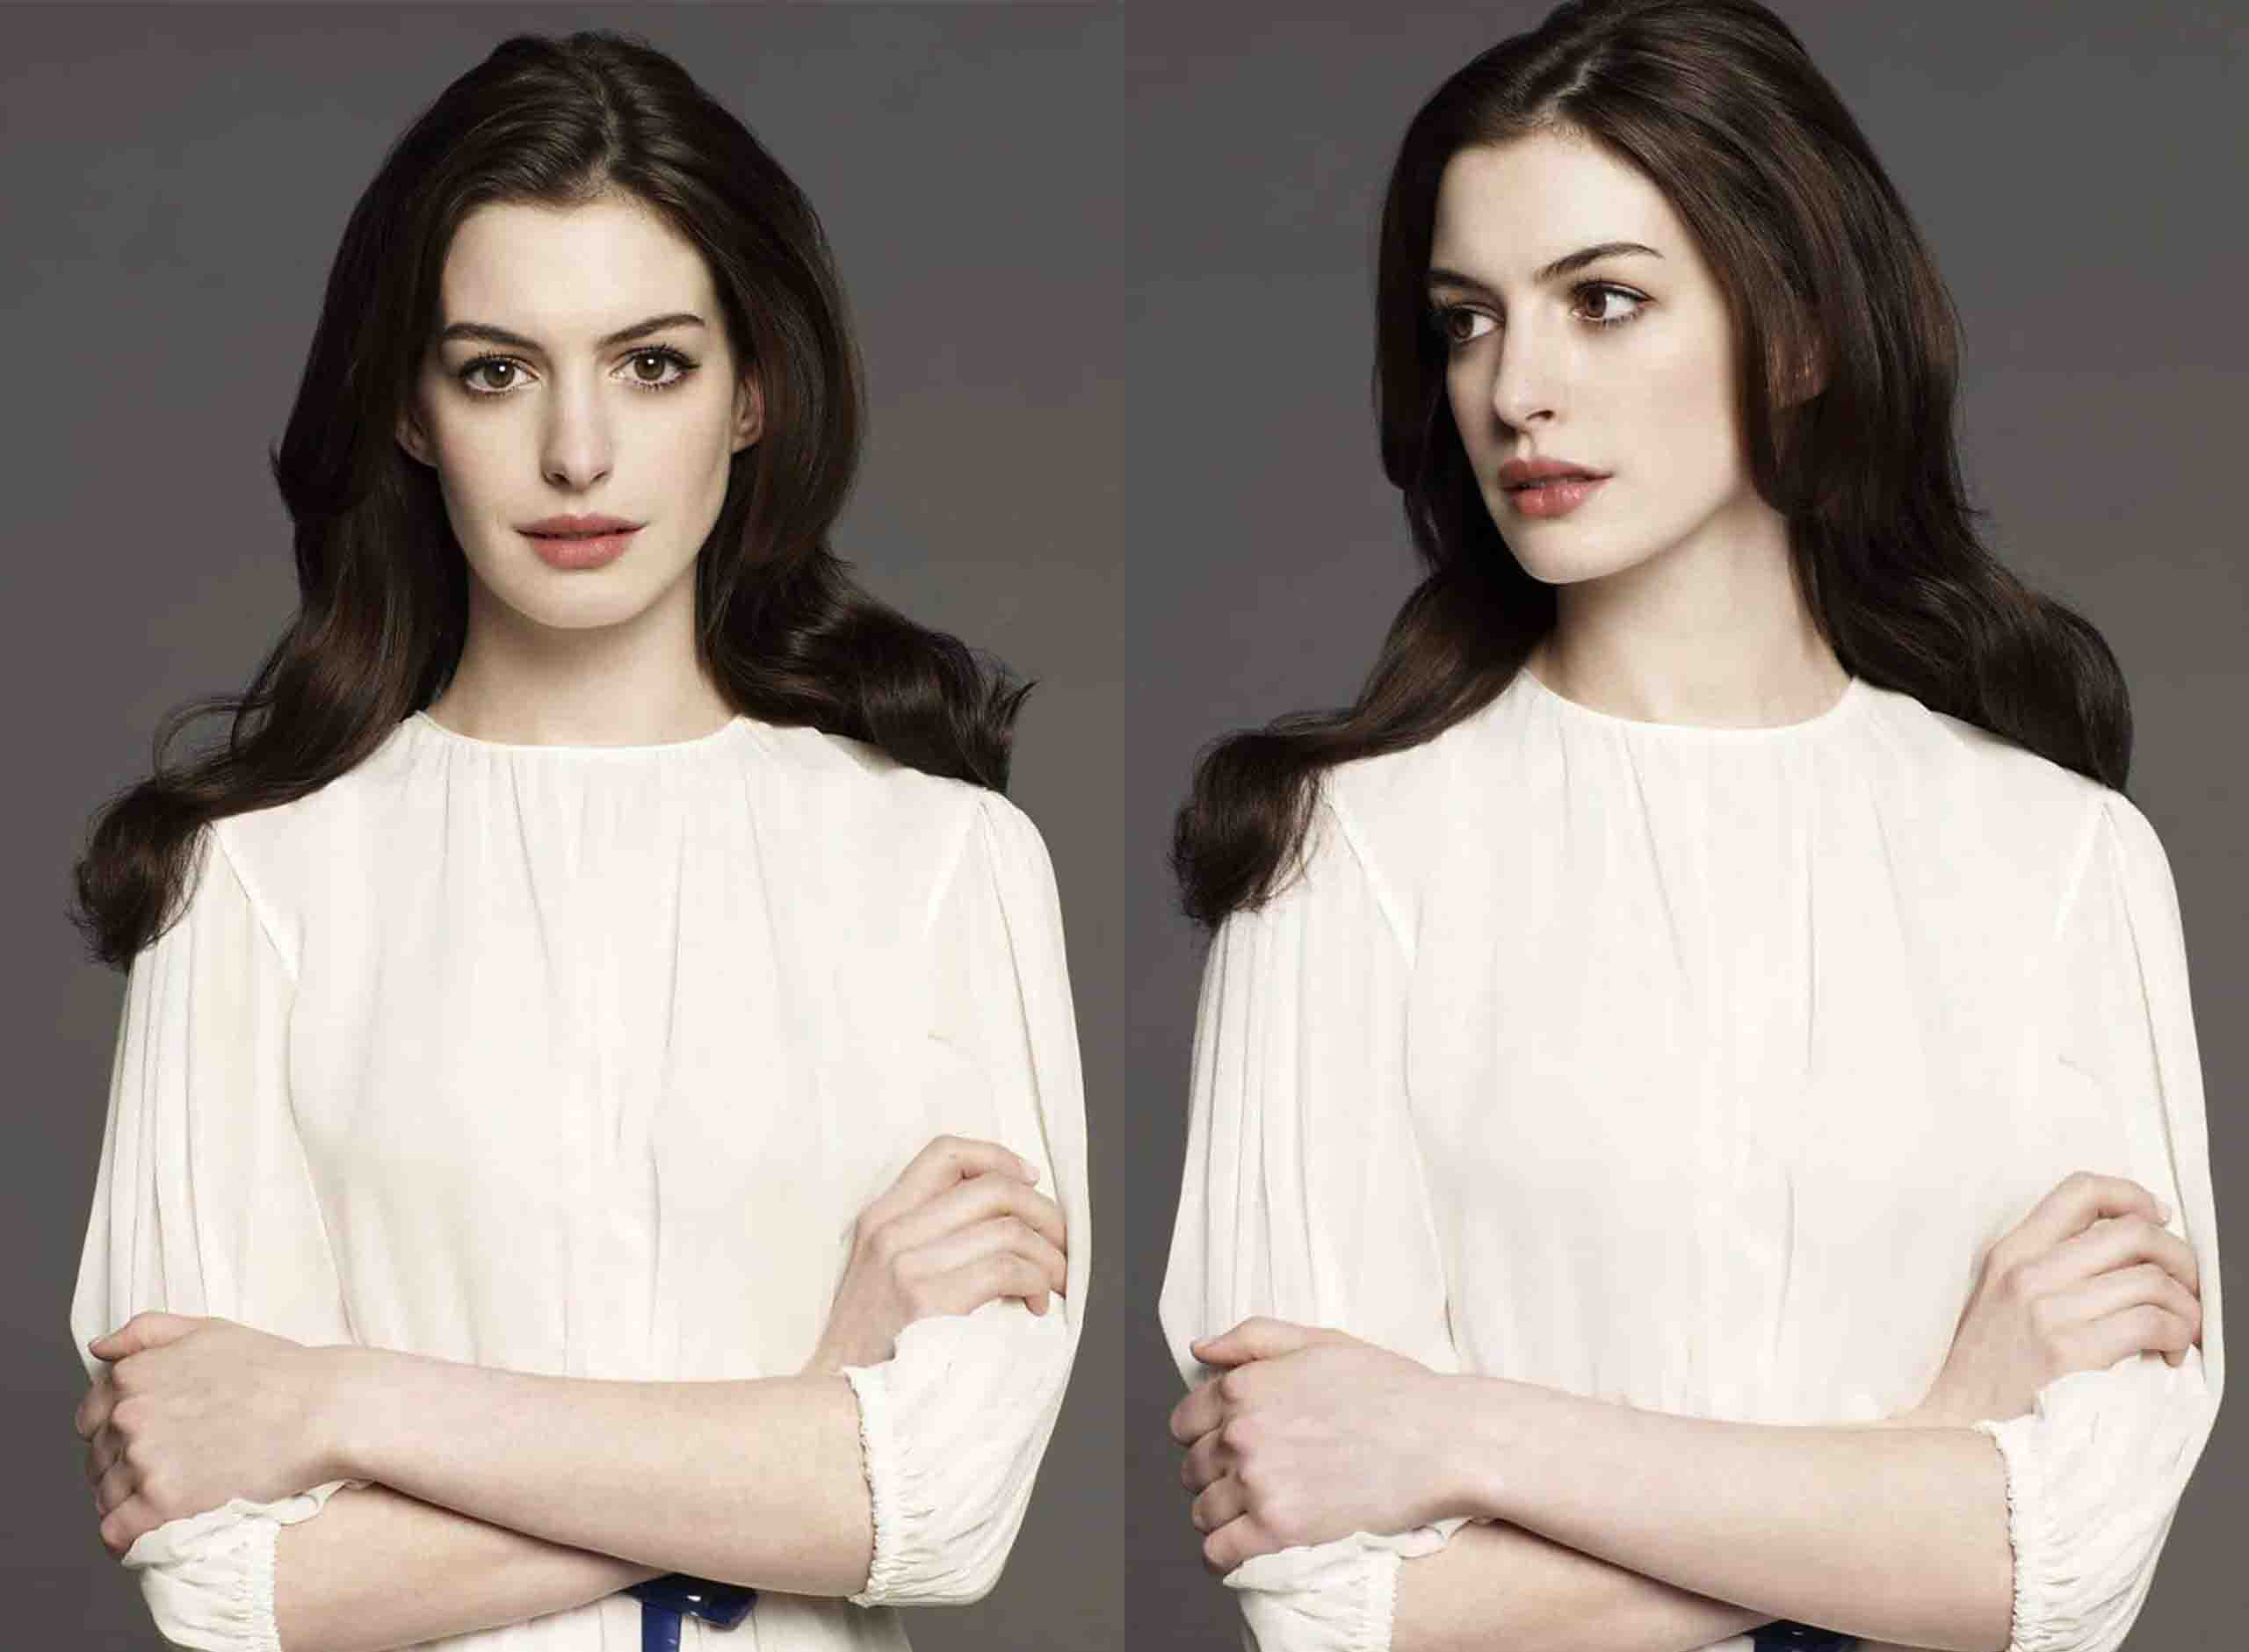 Anne Hathaway Looks like a angel in these pictures